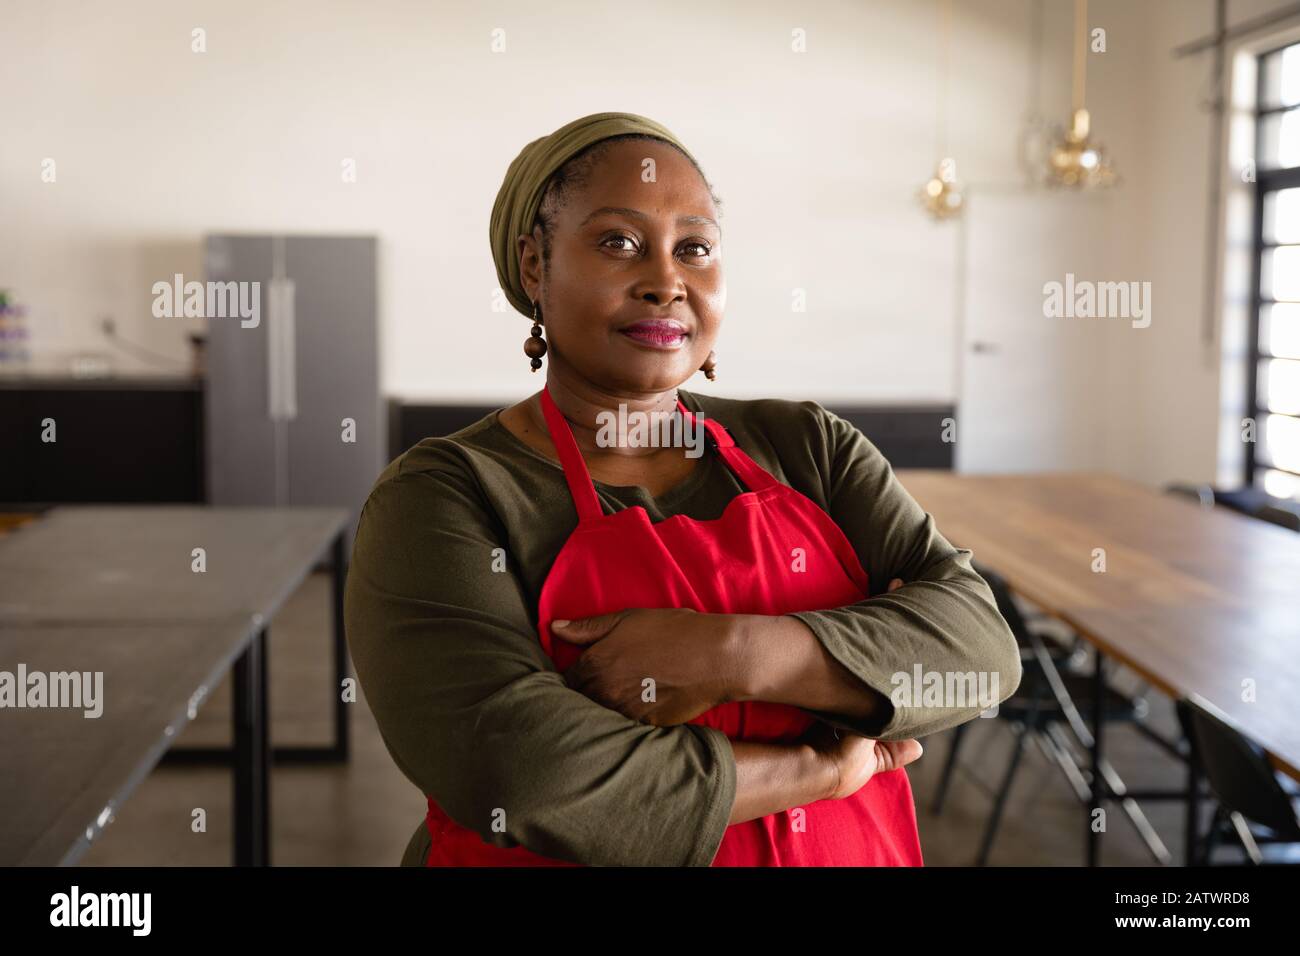 African chef looking at the camera Stock Photo